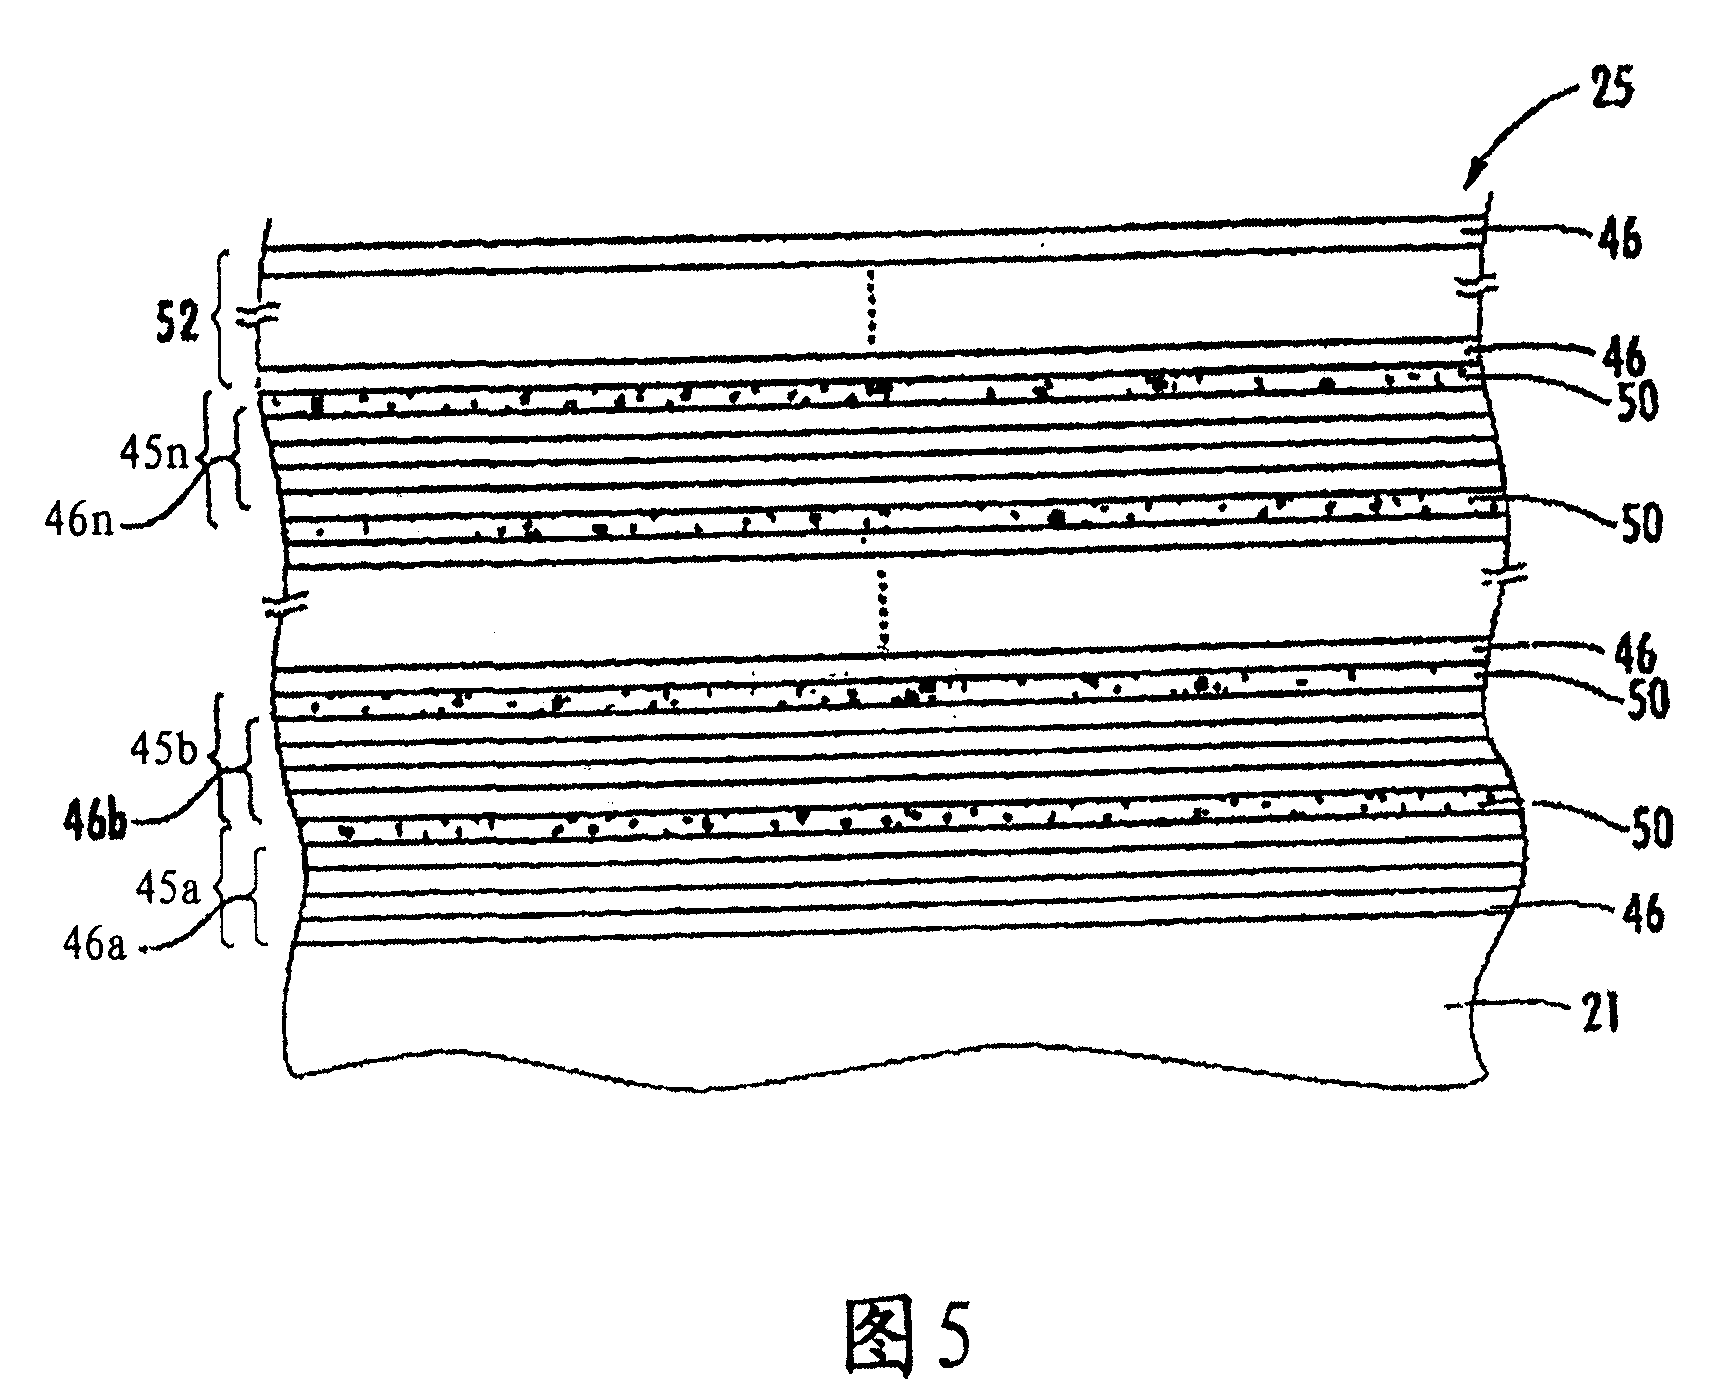 Semiconductor device including a superlattice with regions defining a semiconductor junction